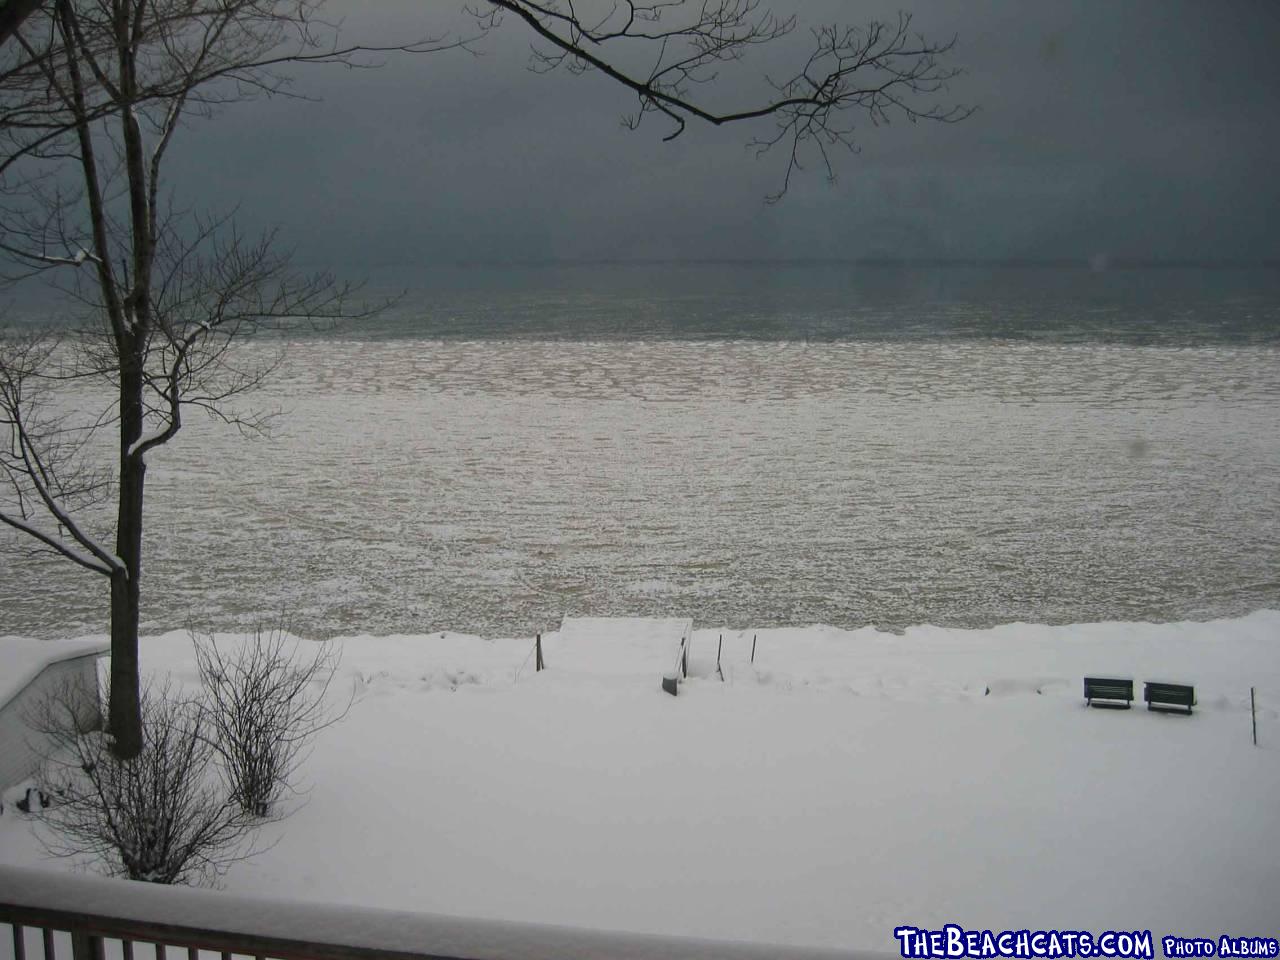 My draw bridge style ramp in the snow in Jan. 2002 Lake Ontario.  No sailing for a few monthes yet.